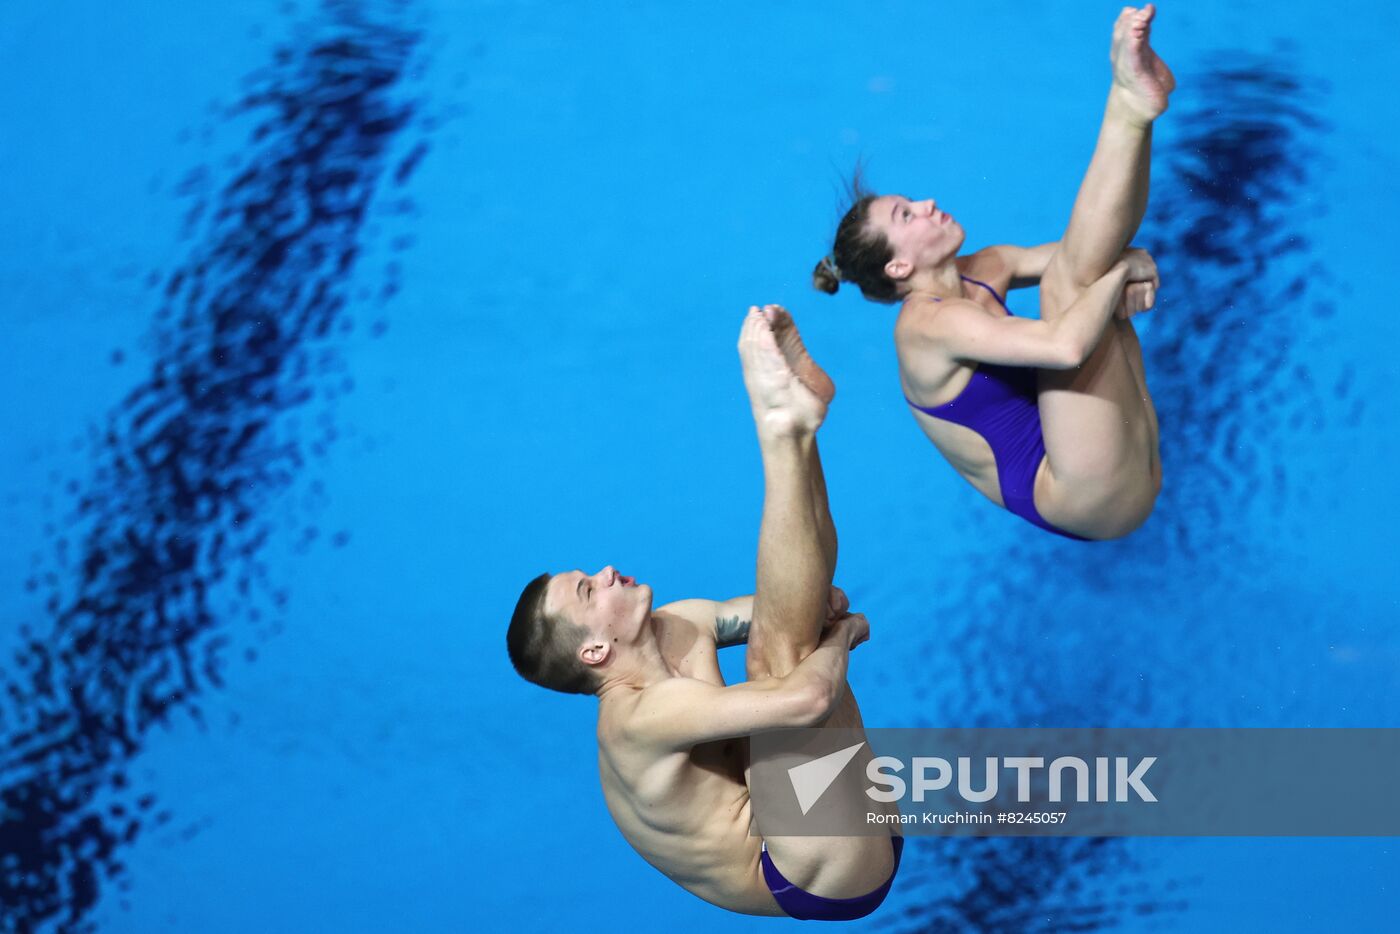 Russia Solidarity Games Synchronised Diving Mixed